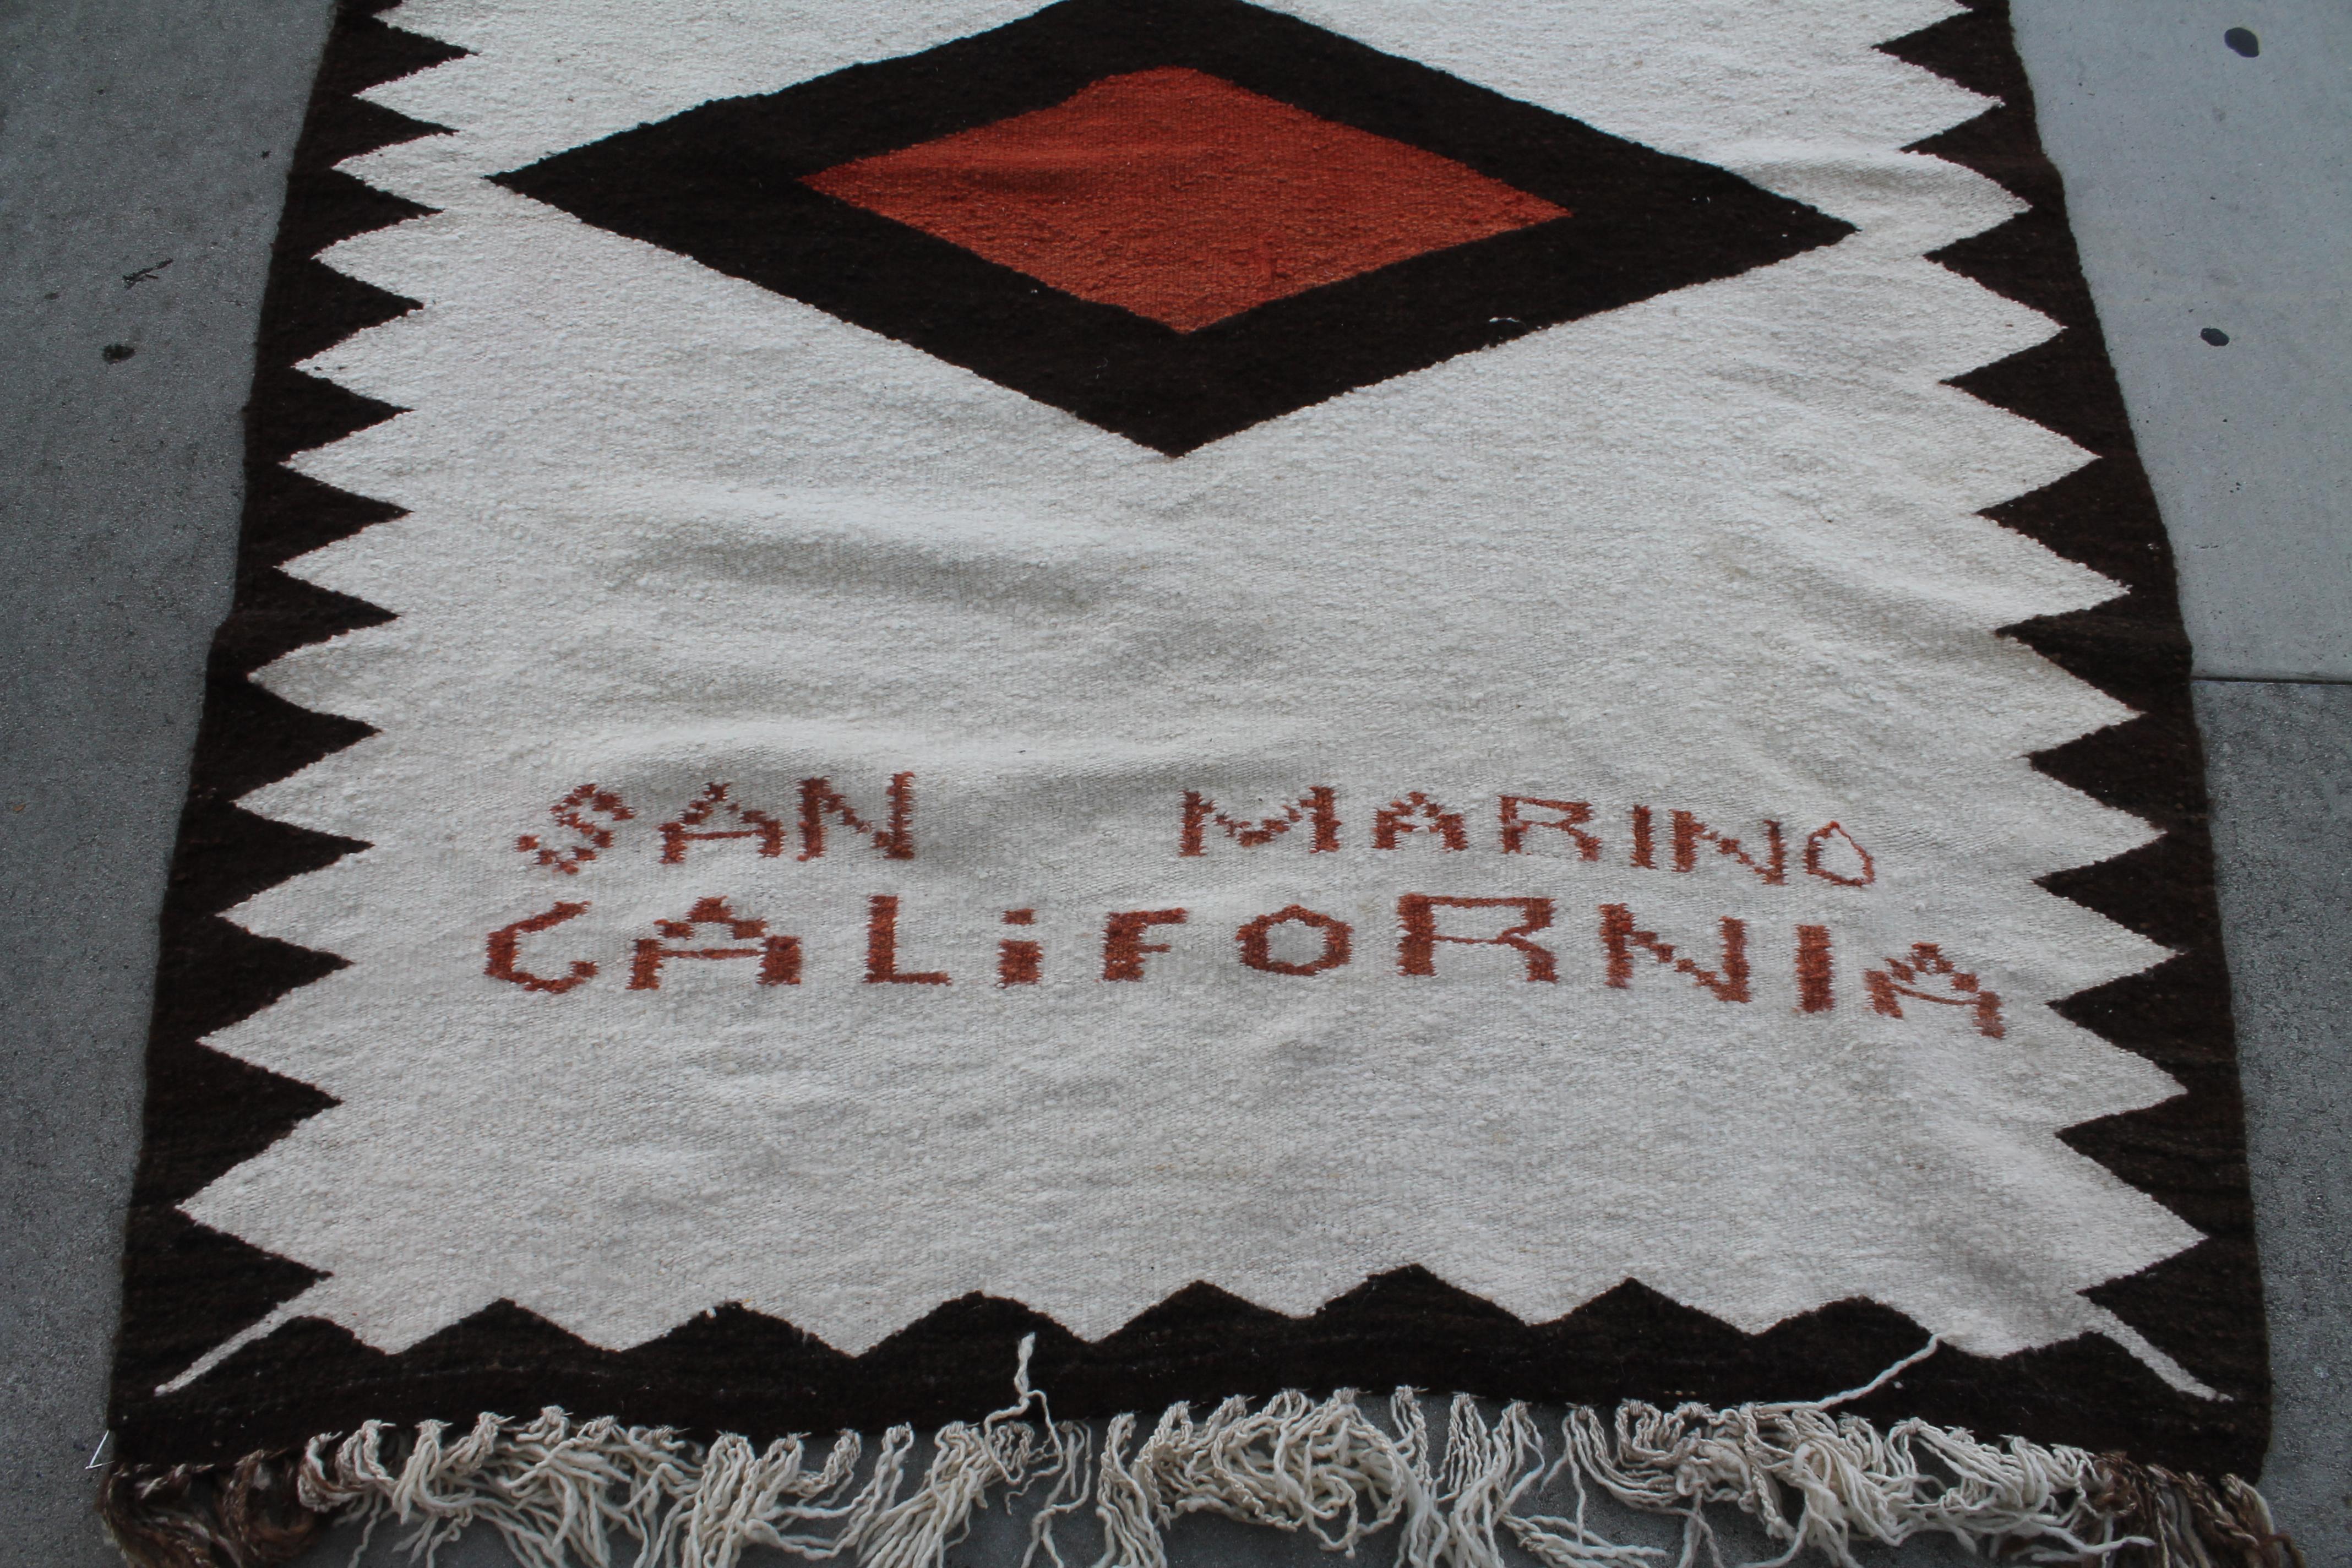 This fine custom made and woven Indian weaving with original fringe and made for Luis Almada in San Marino, California. This is a simple pattern and has a saw tooth inner border. The condition is very good.